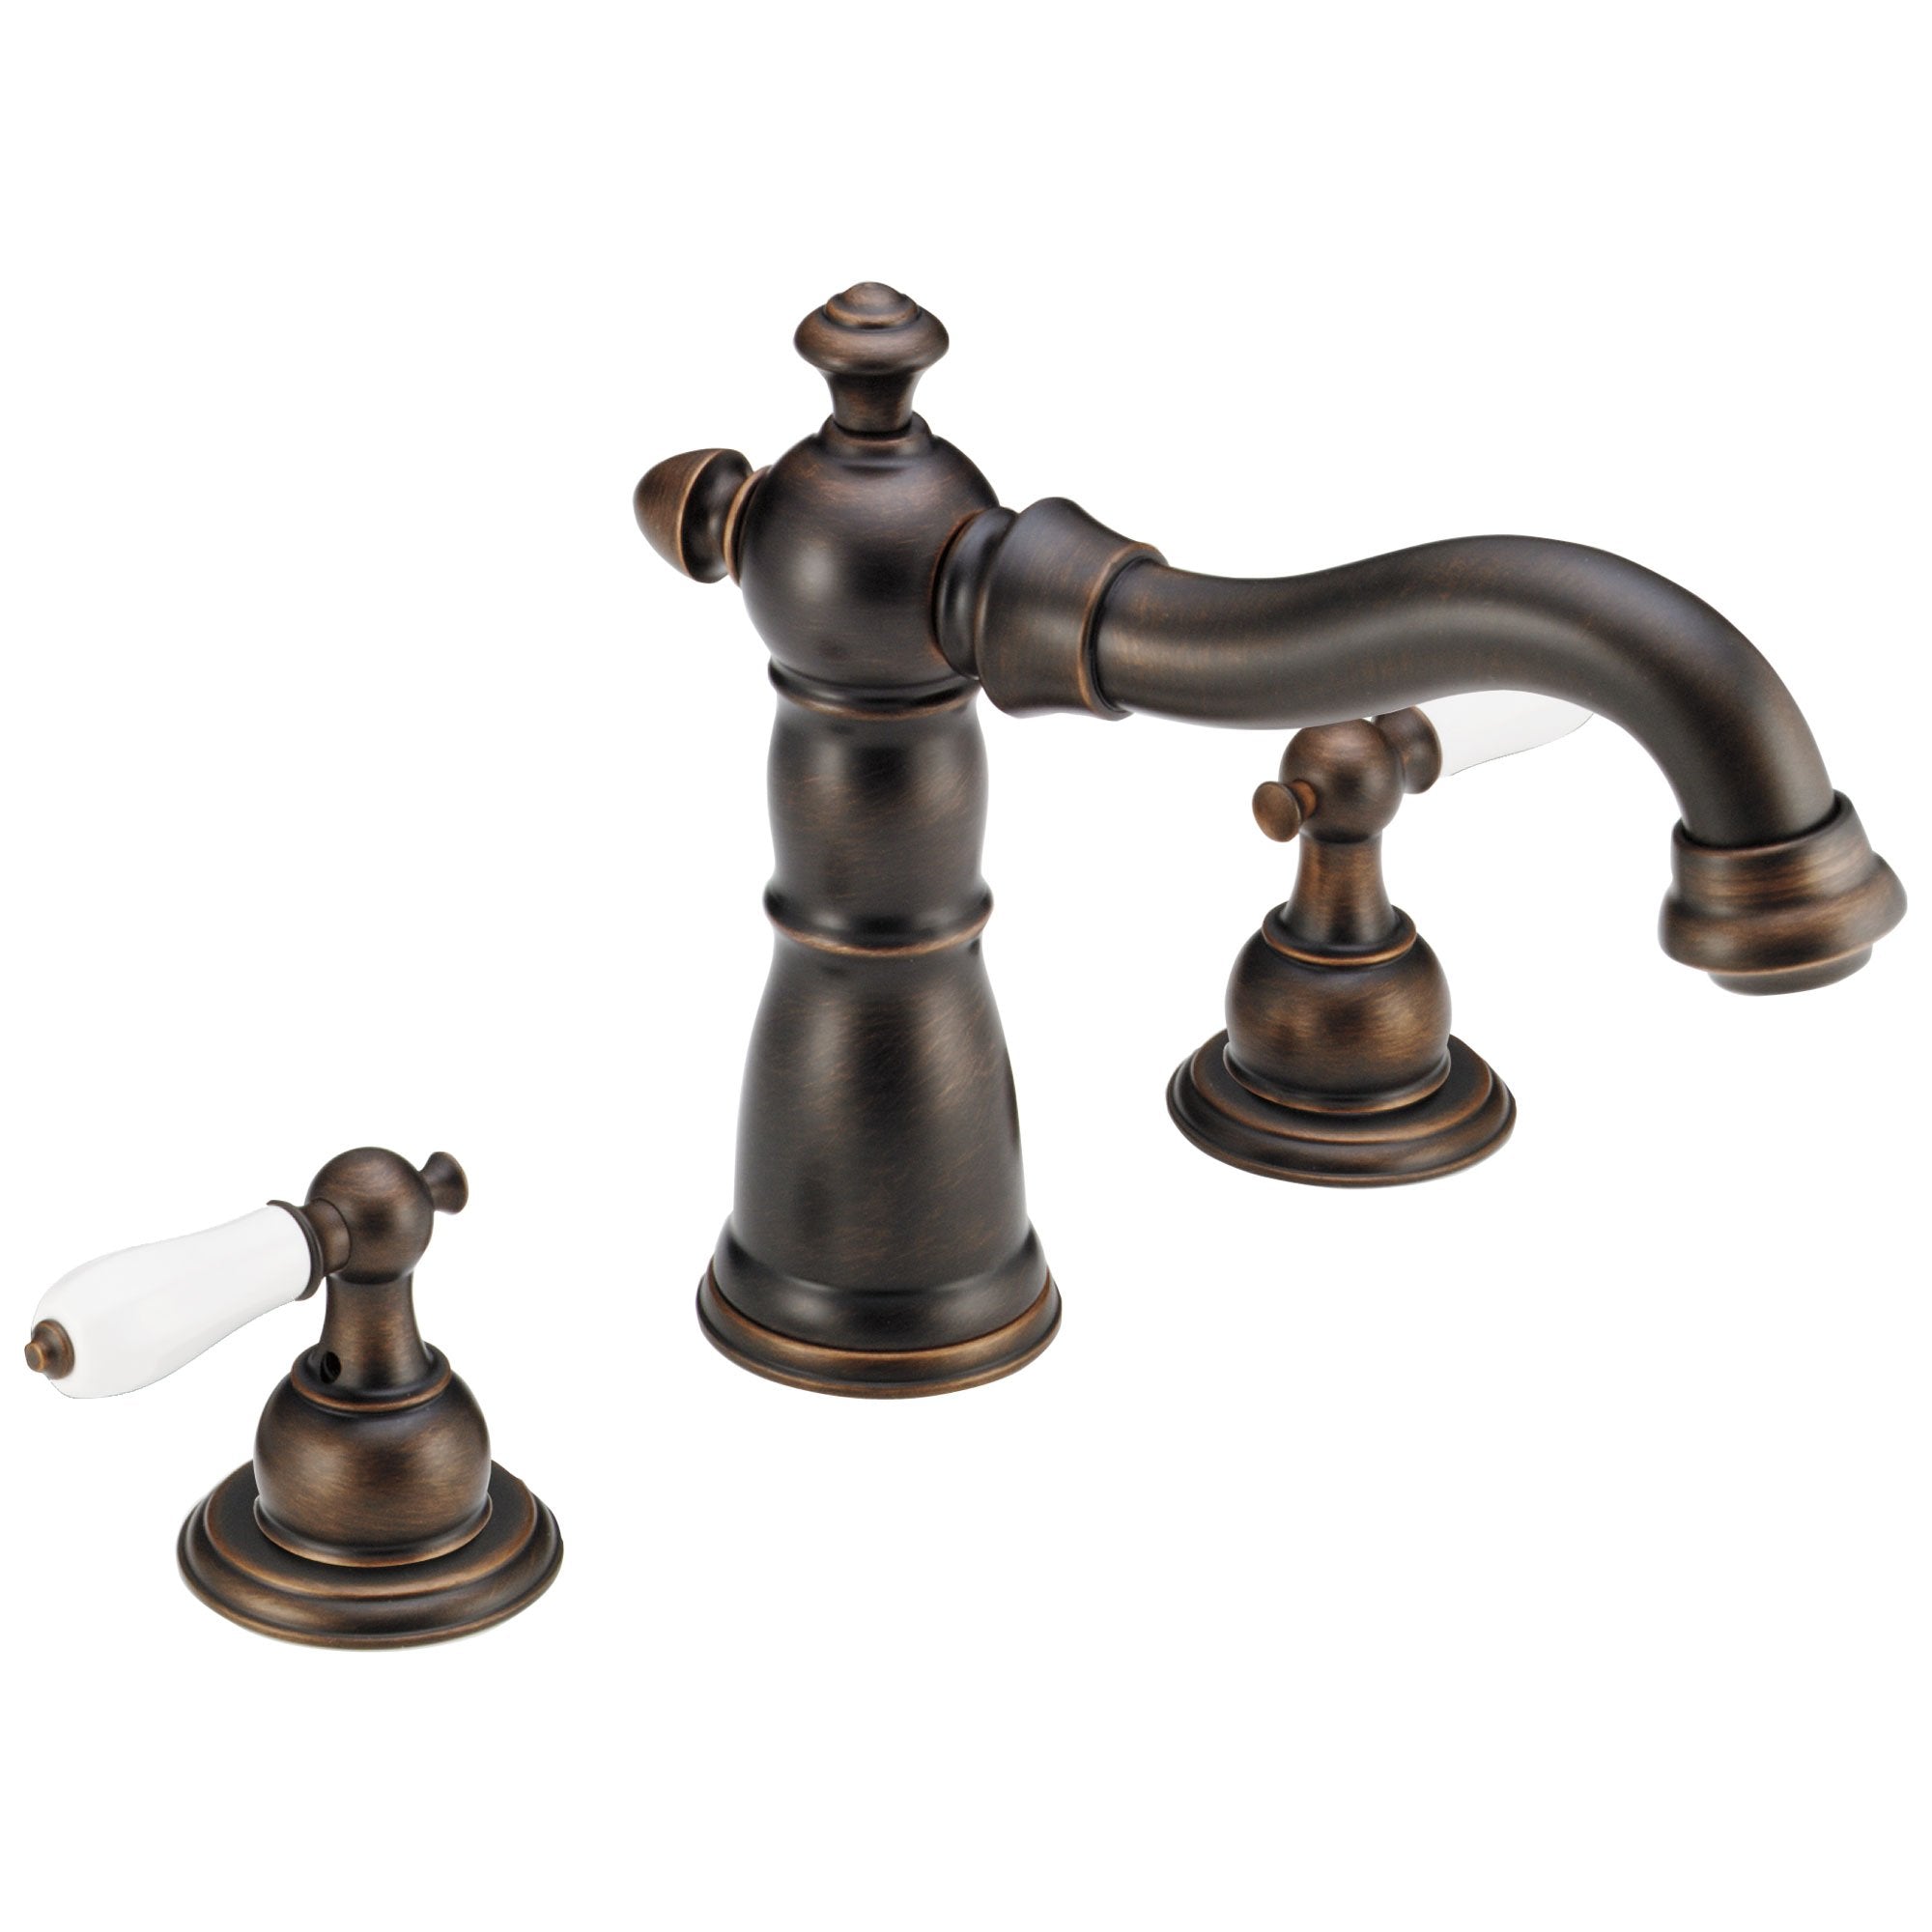 Delta Victorian Venetian Bronze Finish Traditional Roman Tub Filler Faucet COMPLETE ITEM Includes (2) White Porcelain Lever Handles and Rough-in Valve D1458V